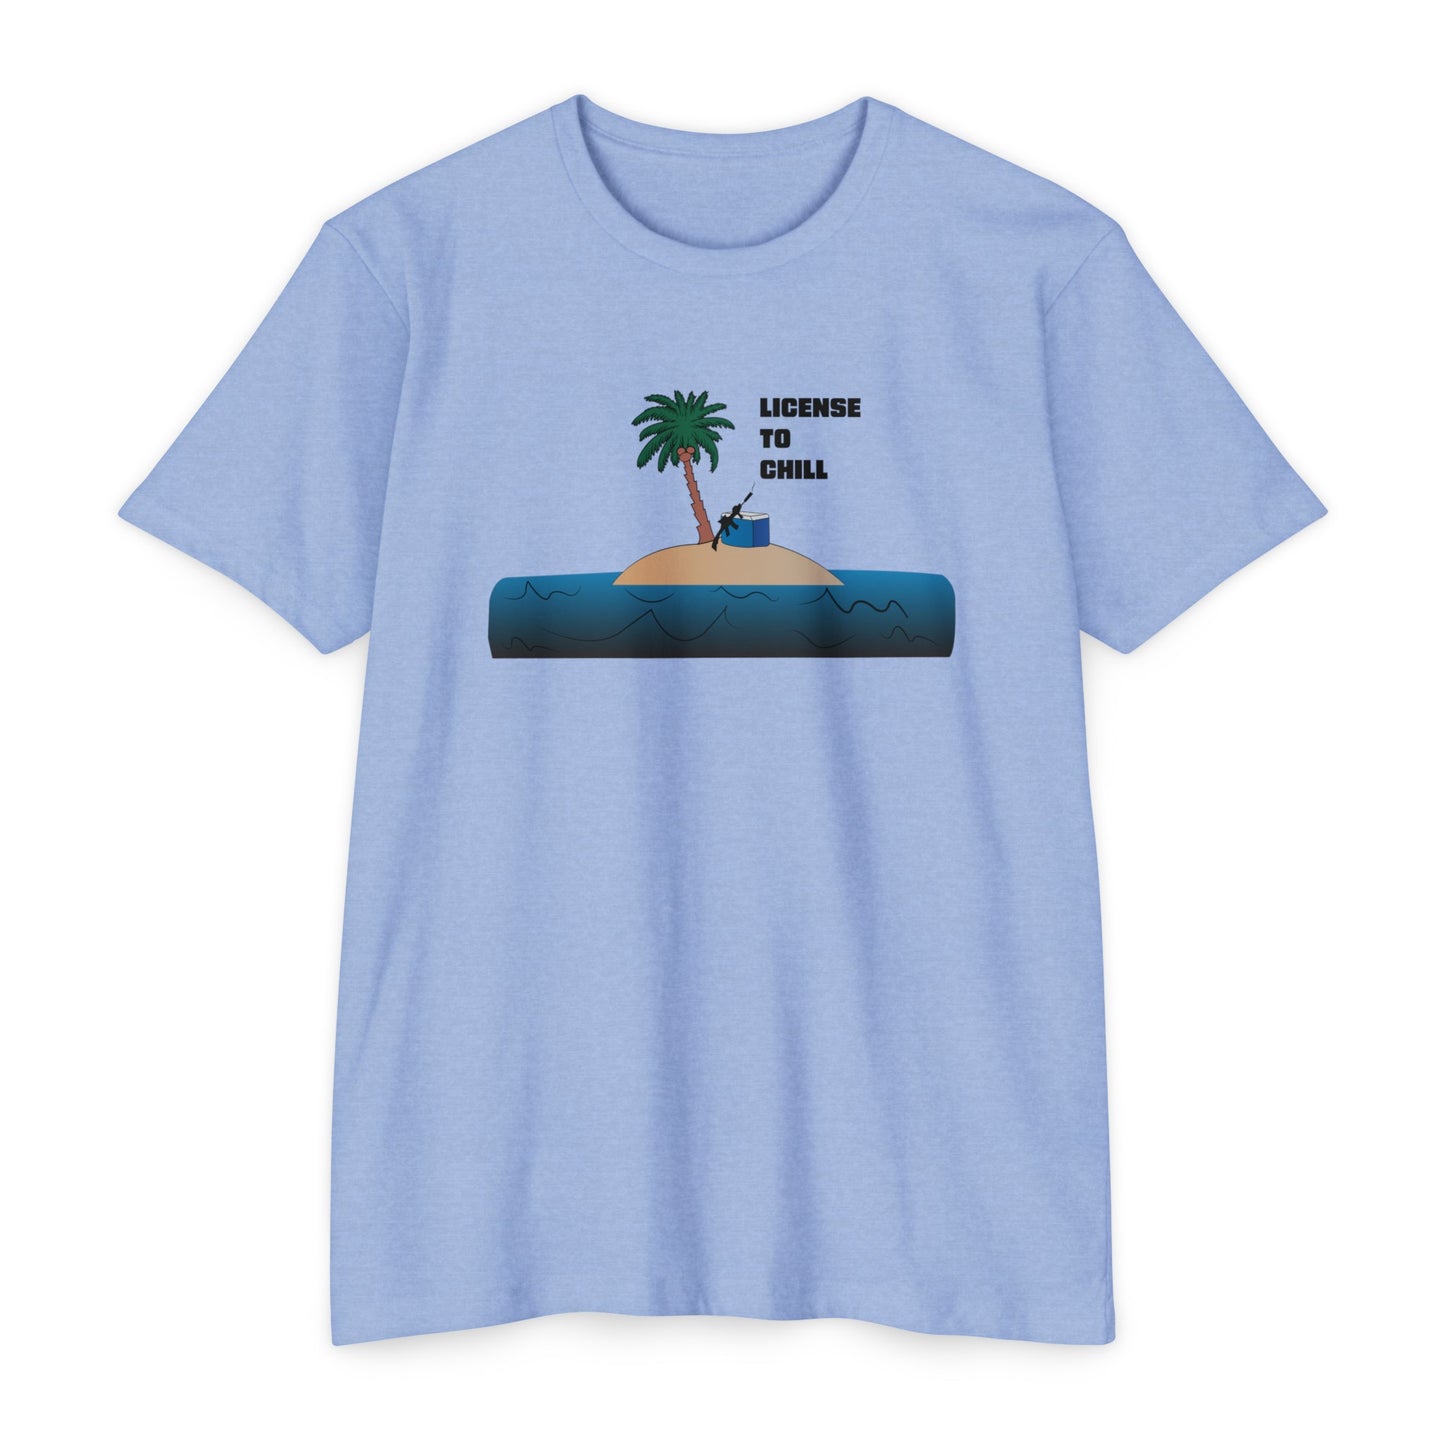 License To Chill Blended T-shirt